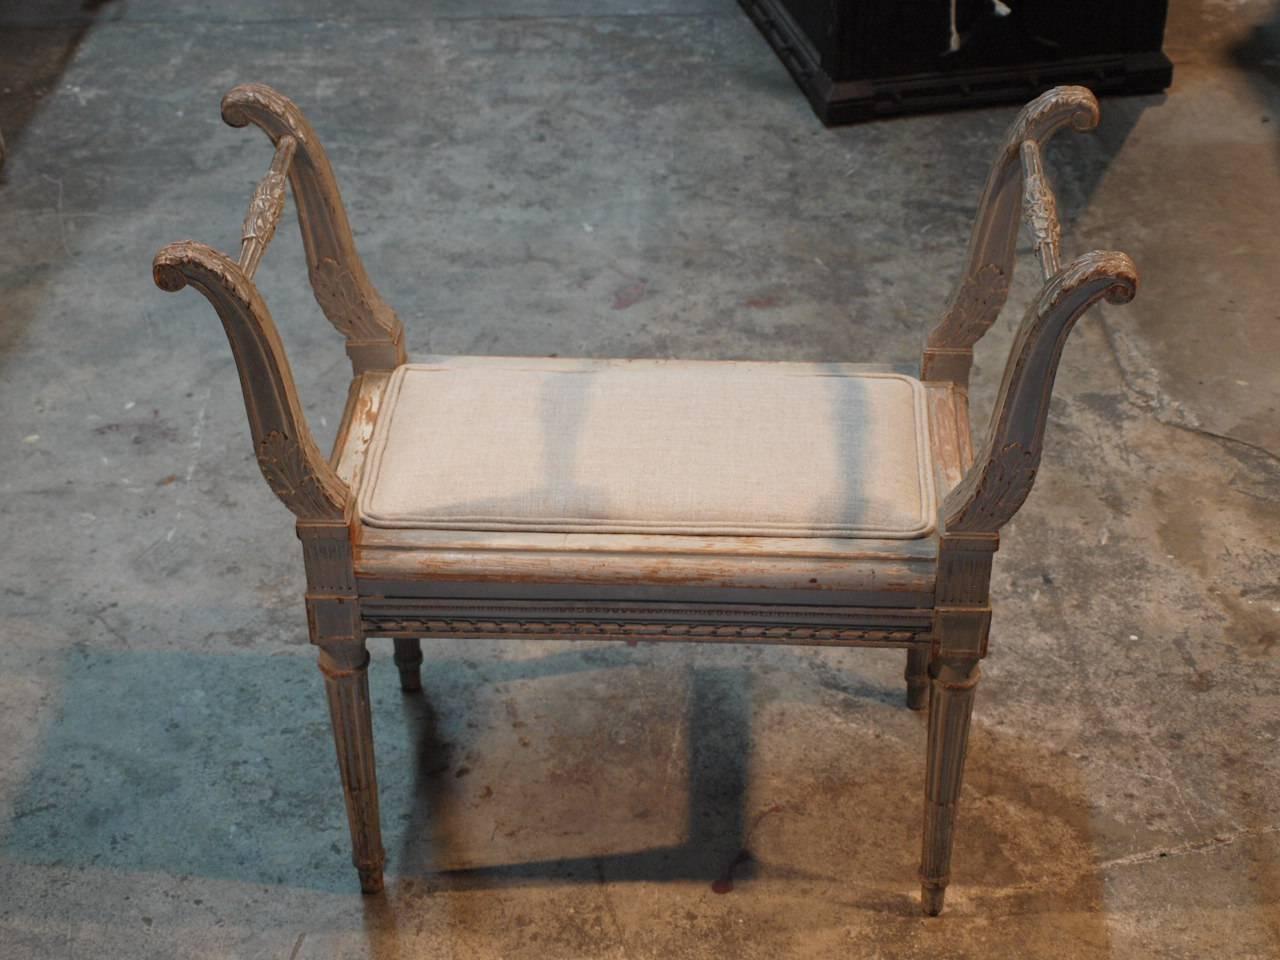 A very charming French late 19th century Louis XVI style banquette or vanity stool in painted wood and newly upholstered seat. Wonderful painted finish in hues of very soft sage with a hint of very light grey.